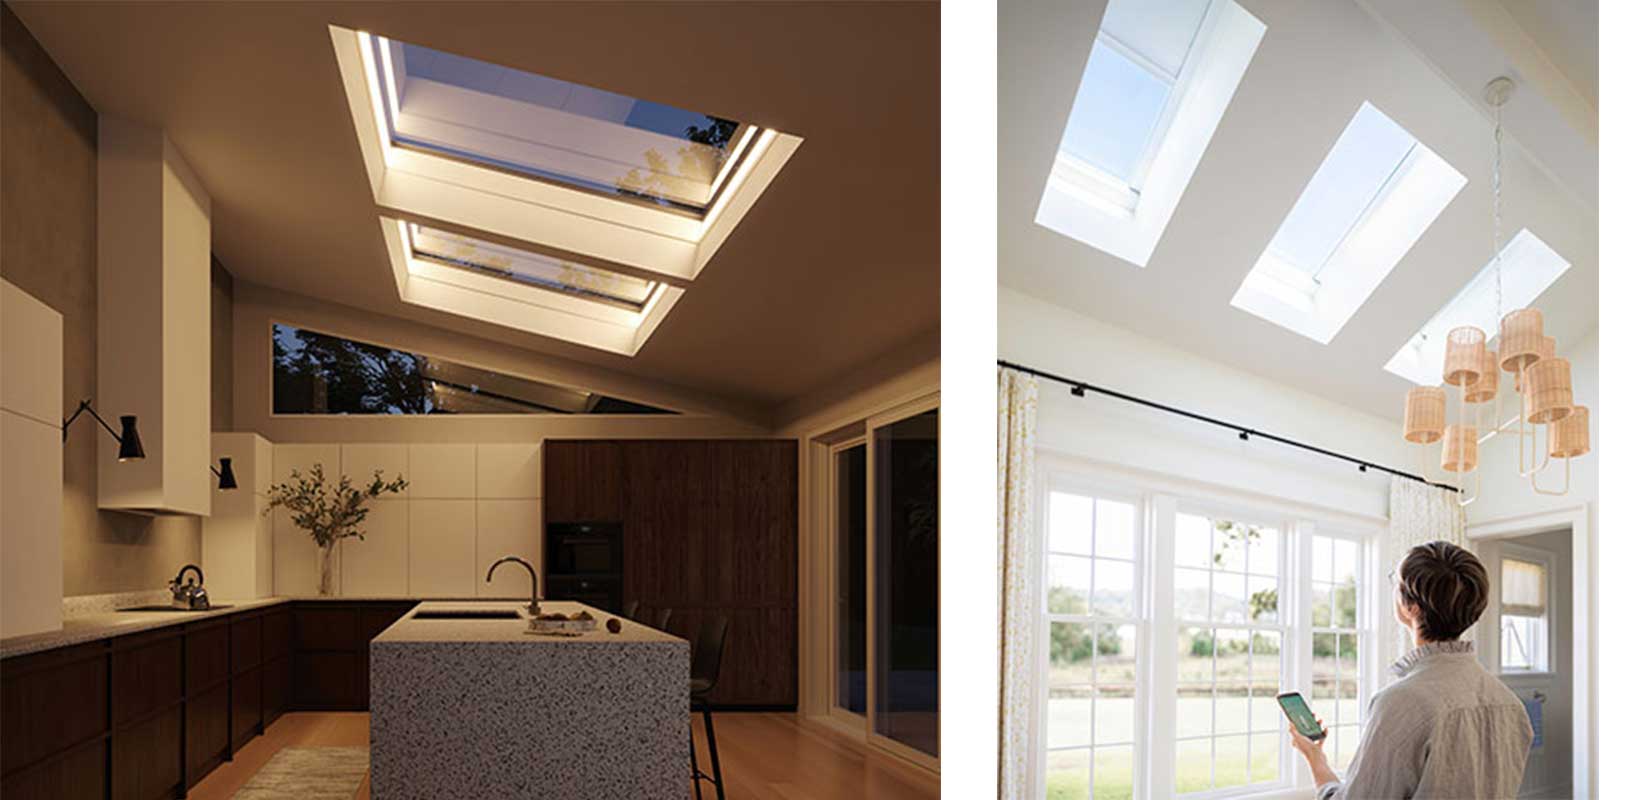 Two Marvin Awaken Skylights illuminated over a modern kitchen island at night, and a woman operating Marvin Awaken Skylights from her phone in the Southern Living Idea House.